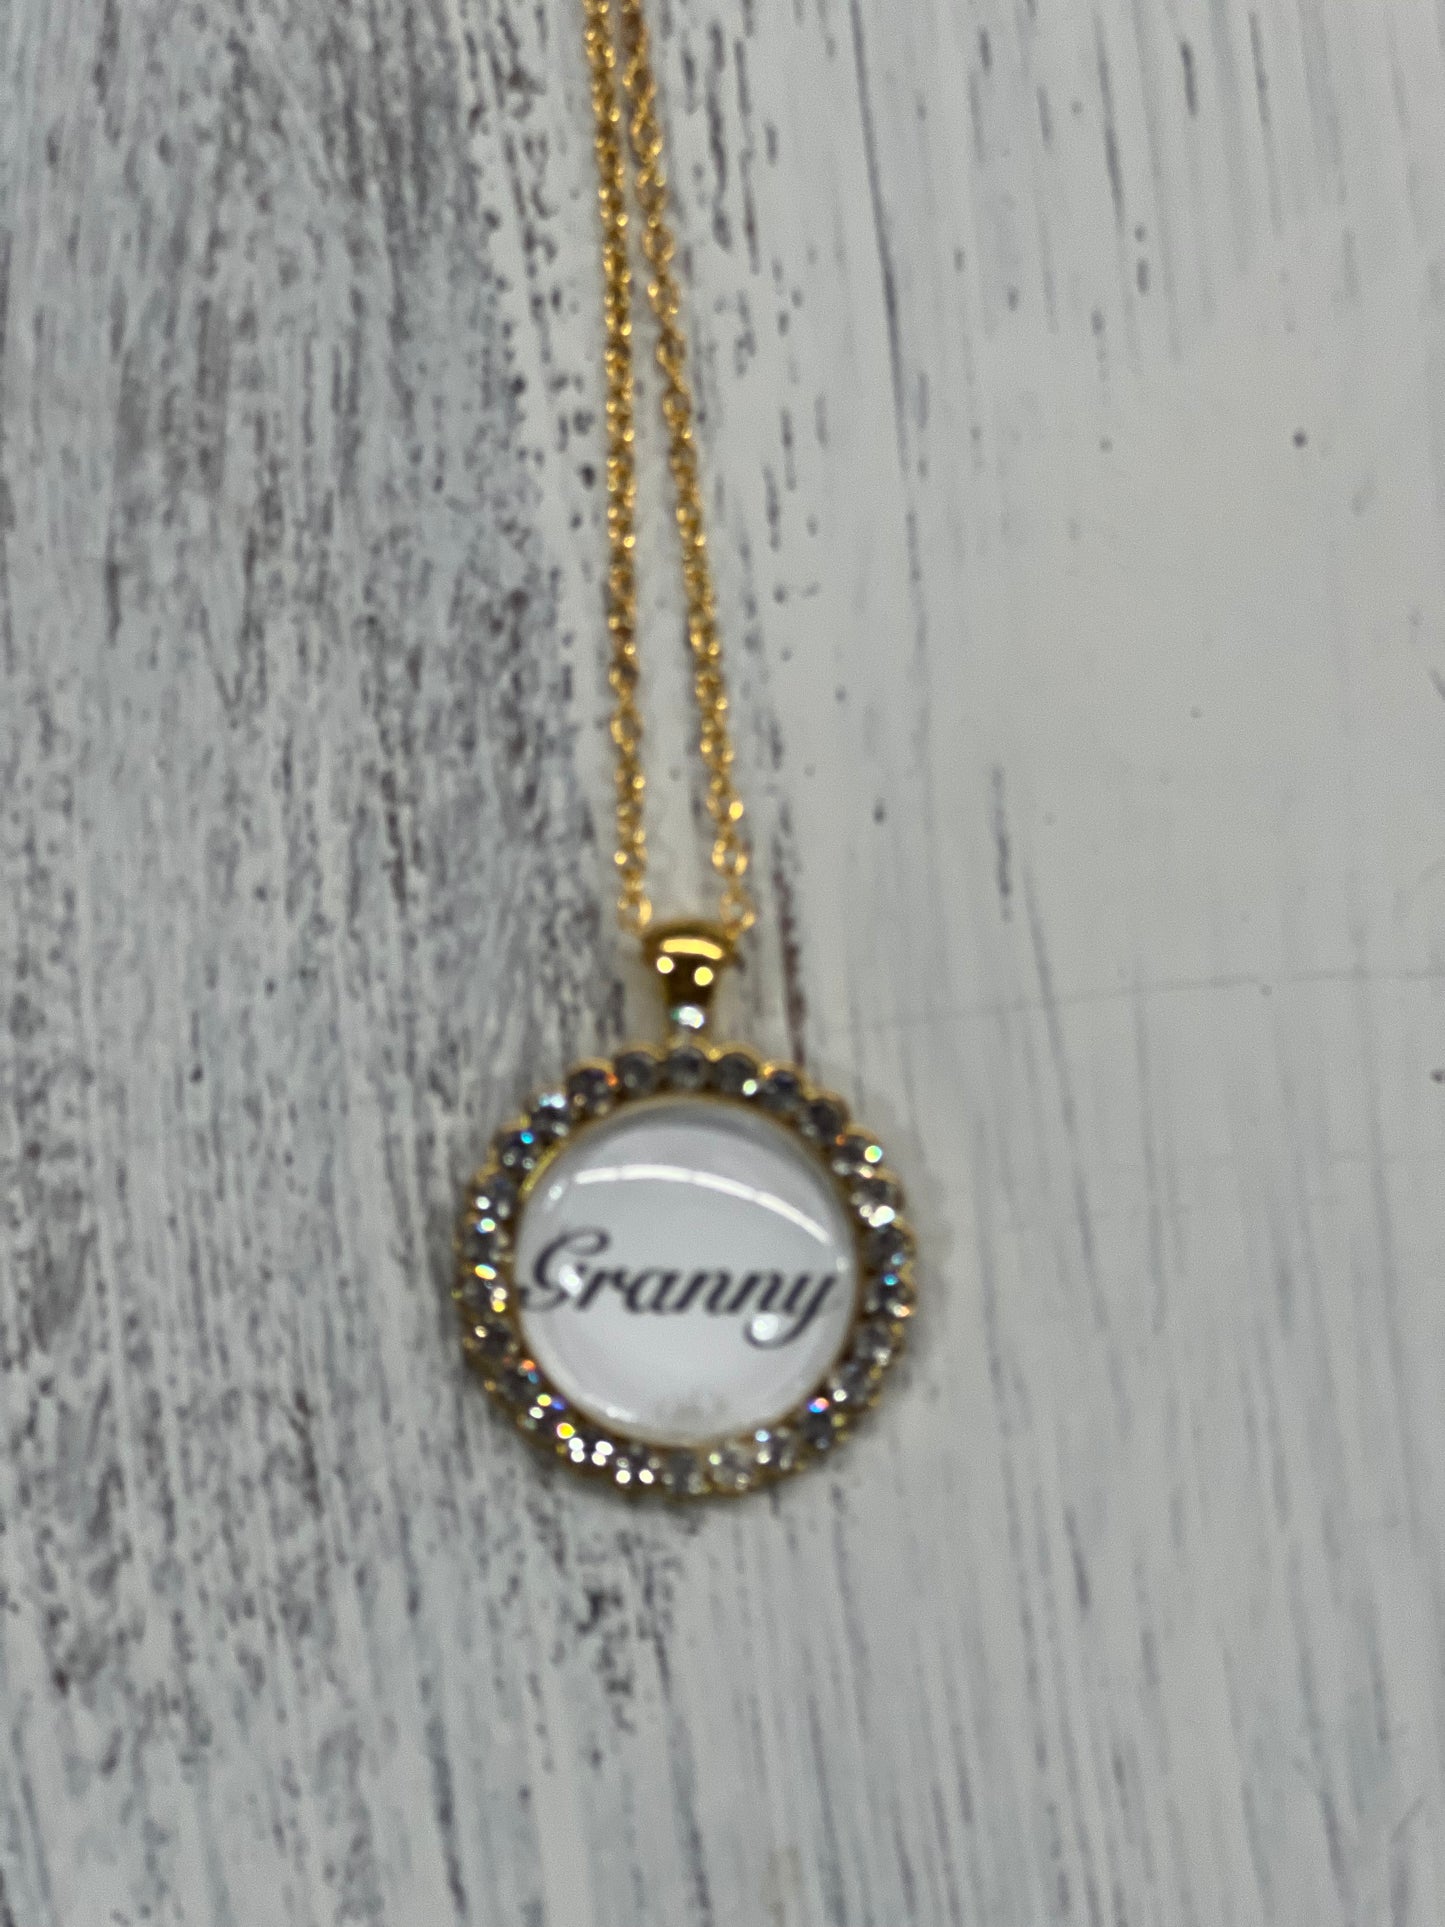 Gorgeous gold Grandmother necklaces